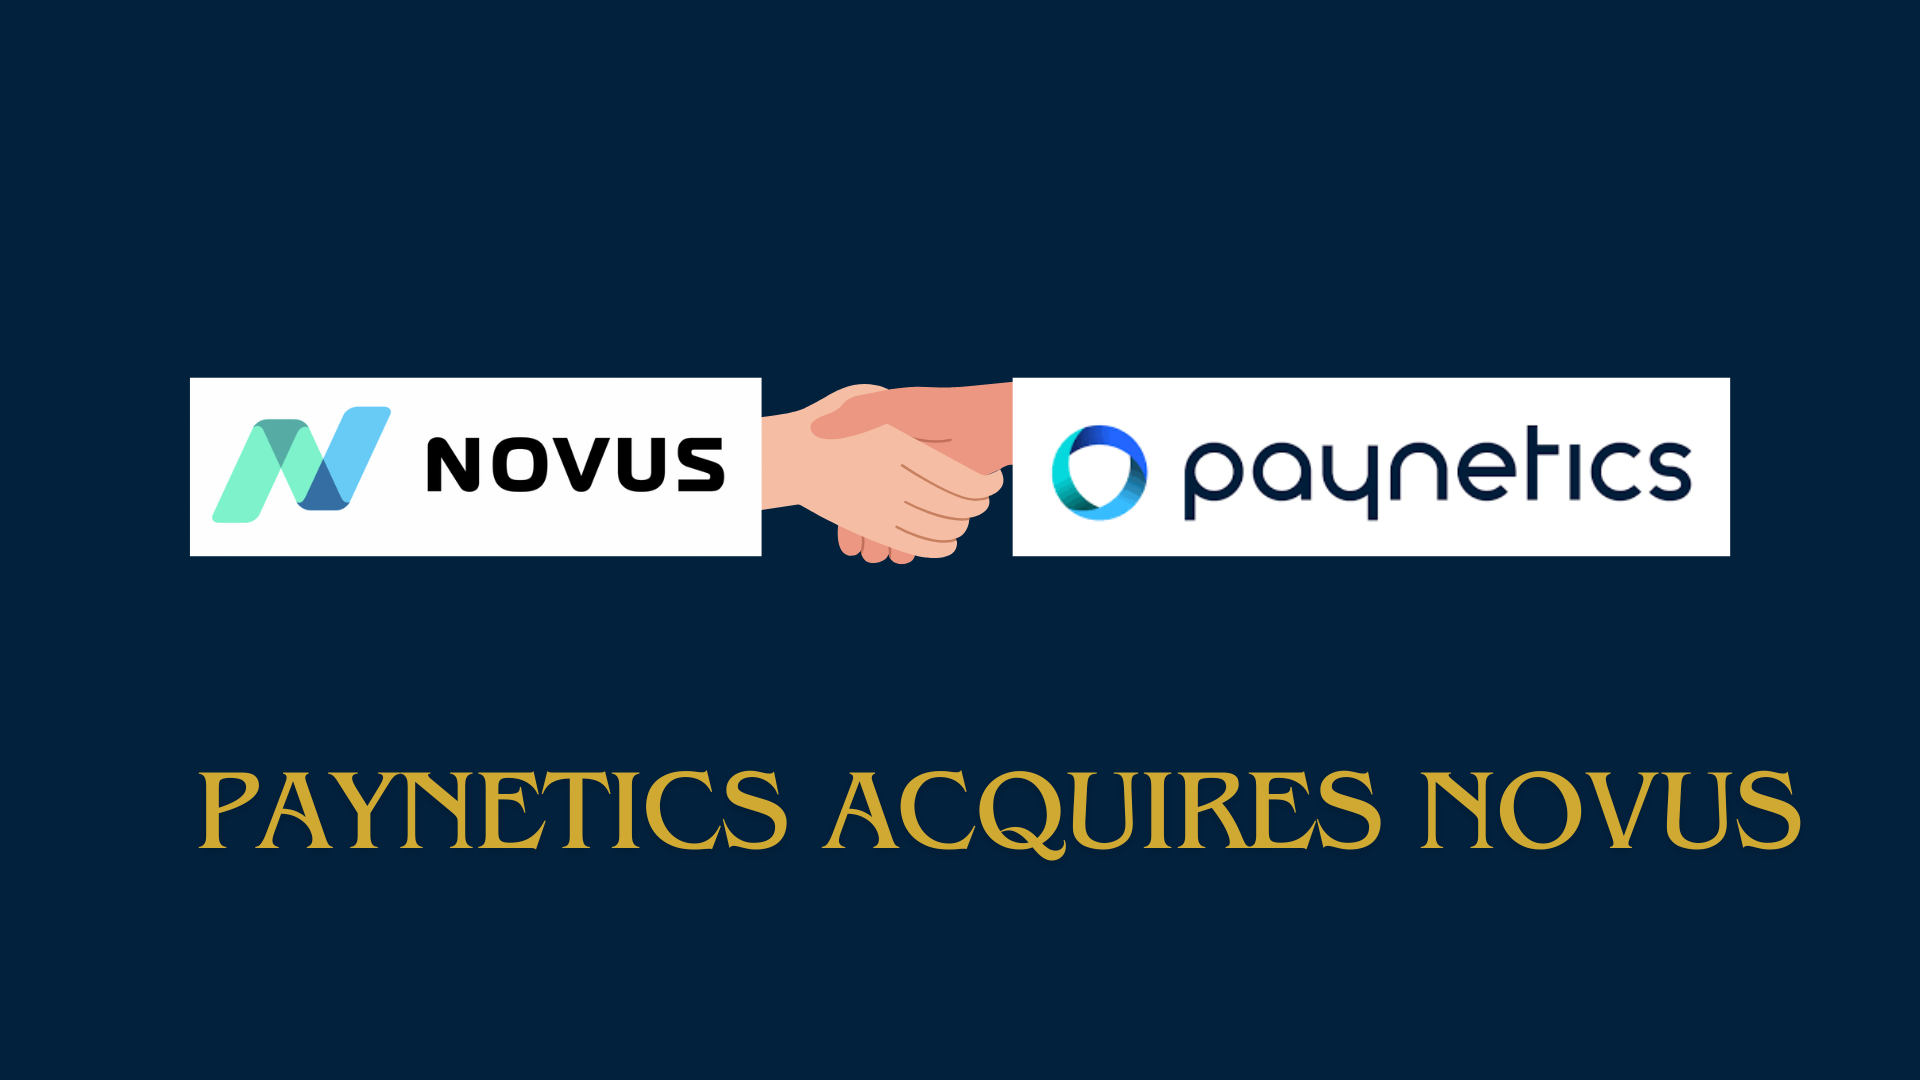 You are currently viewing Paynetics Expands ESG Commitment with Acquisition of Novus